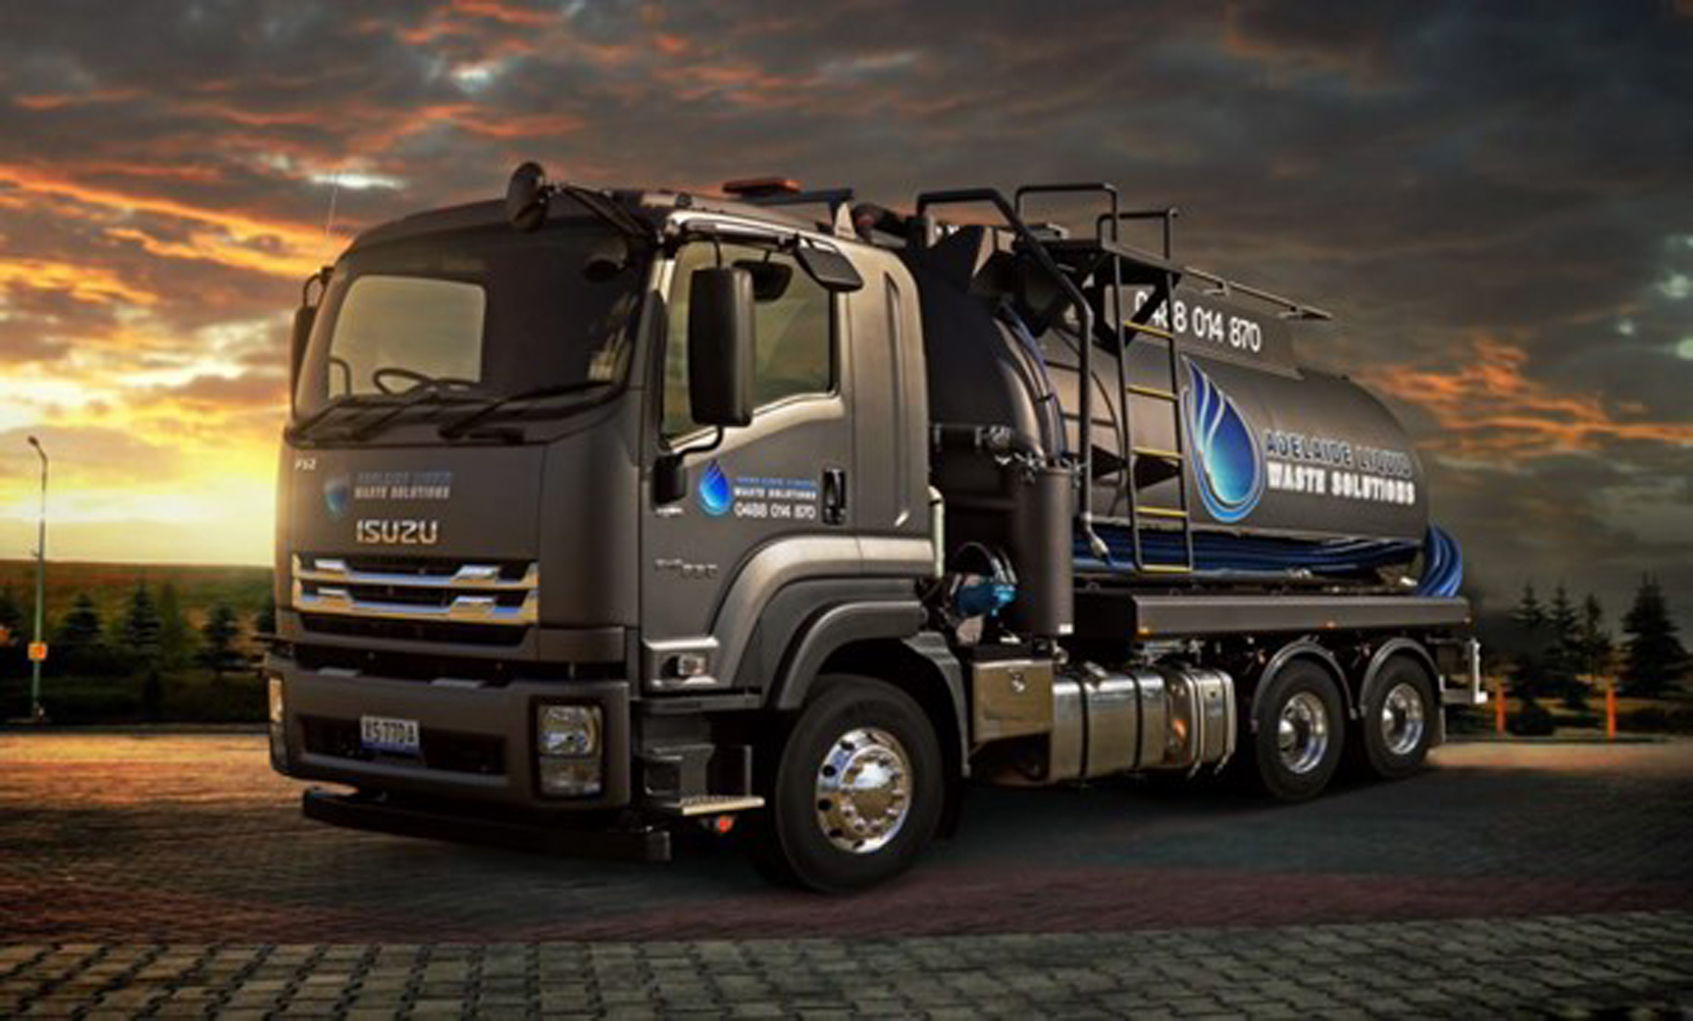 Adelaide Liquid Waste Solutions 2021 Truck of the Year Grand Prize Winner